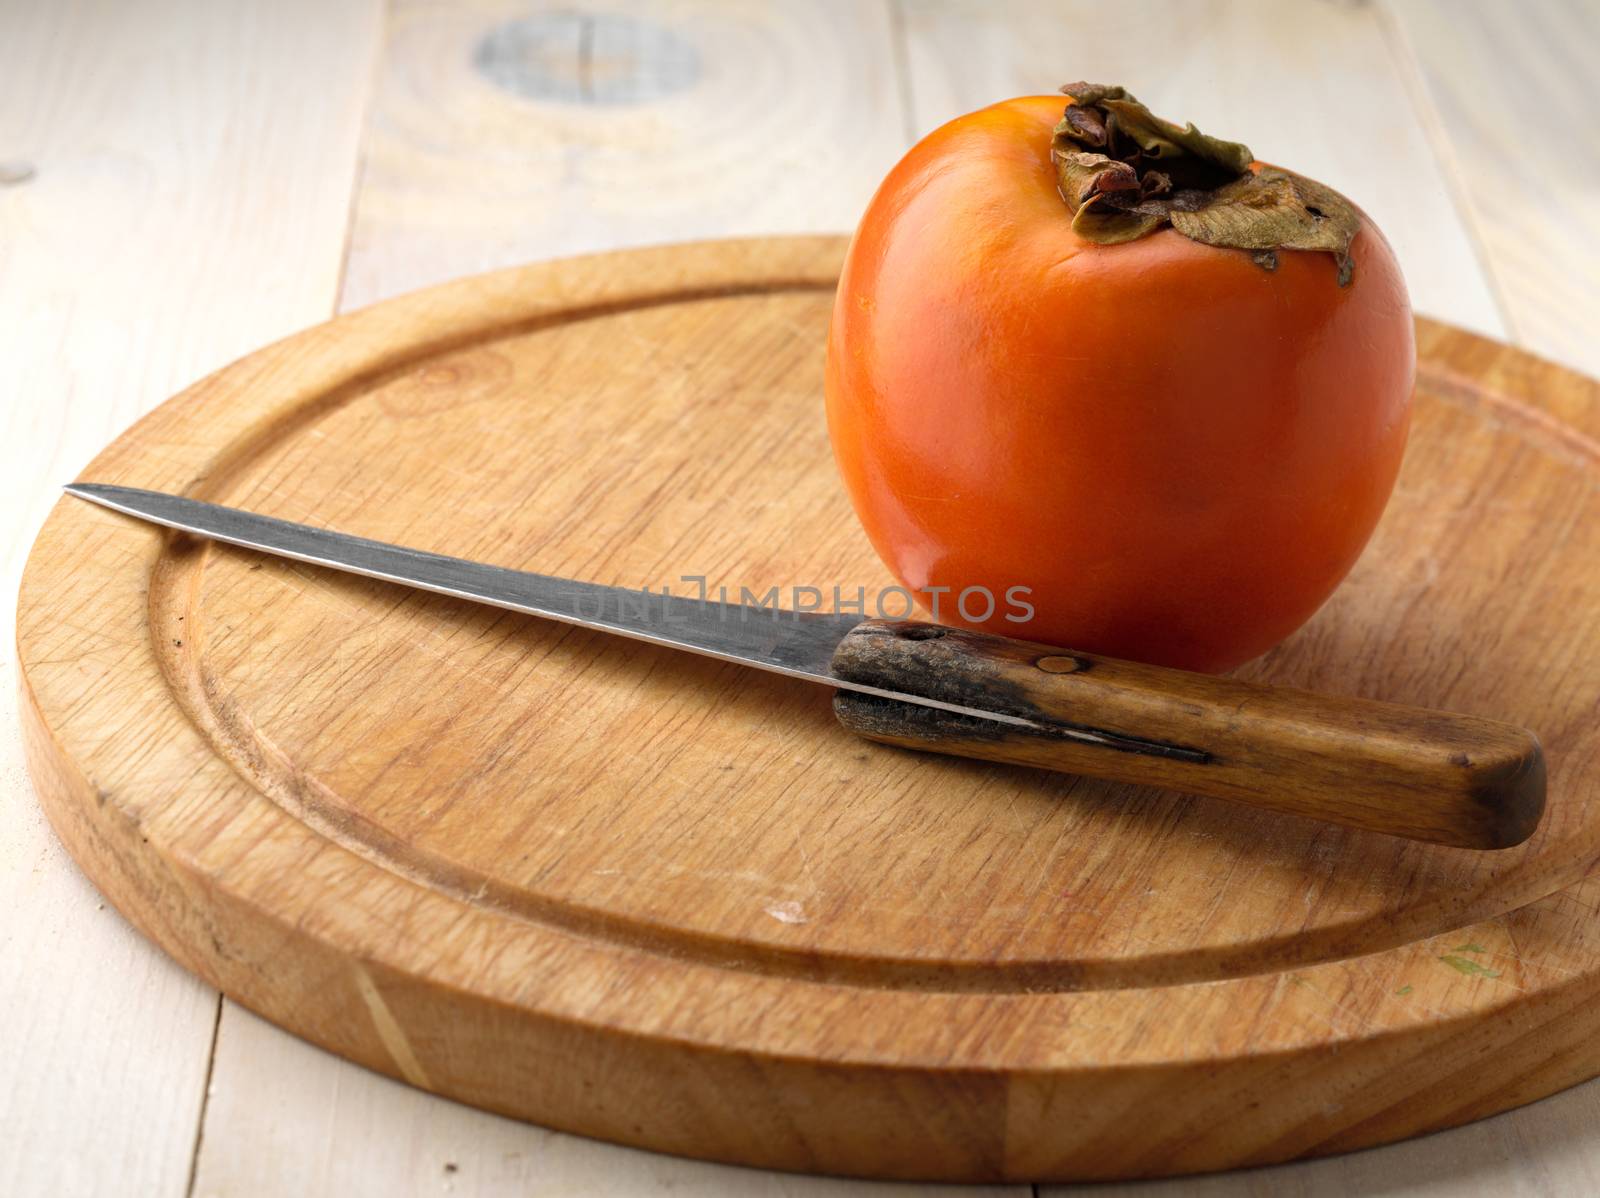 Tasty and ripe persimmon on wooden board
